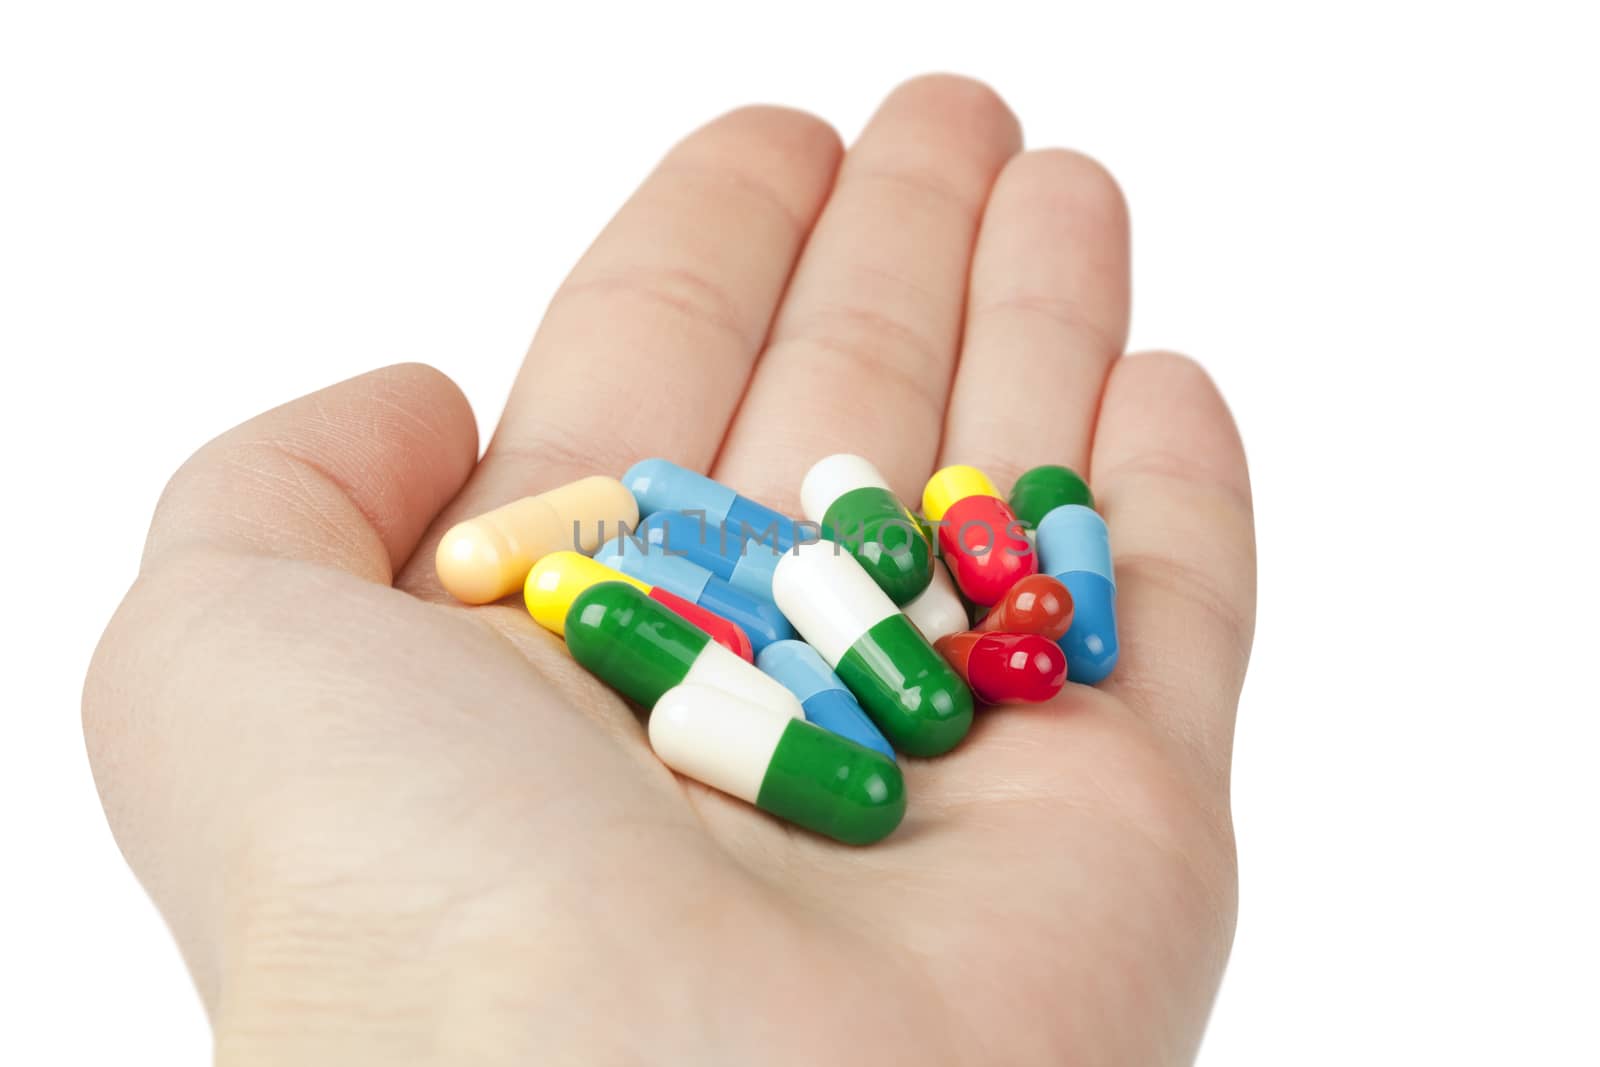 Many pills in the hand isolated on white. Medicine concept